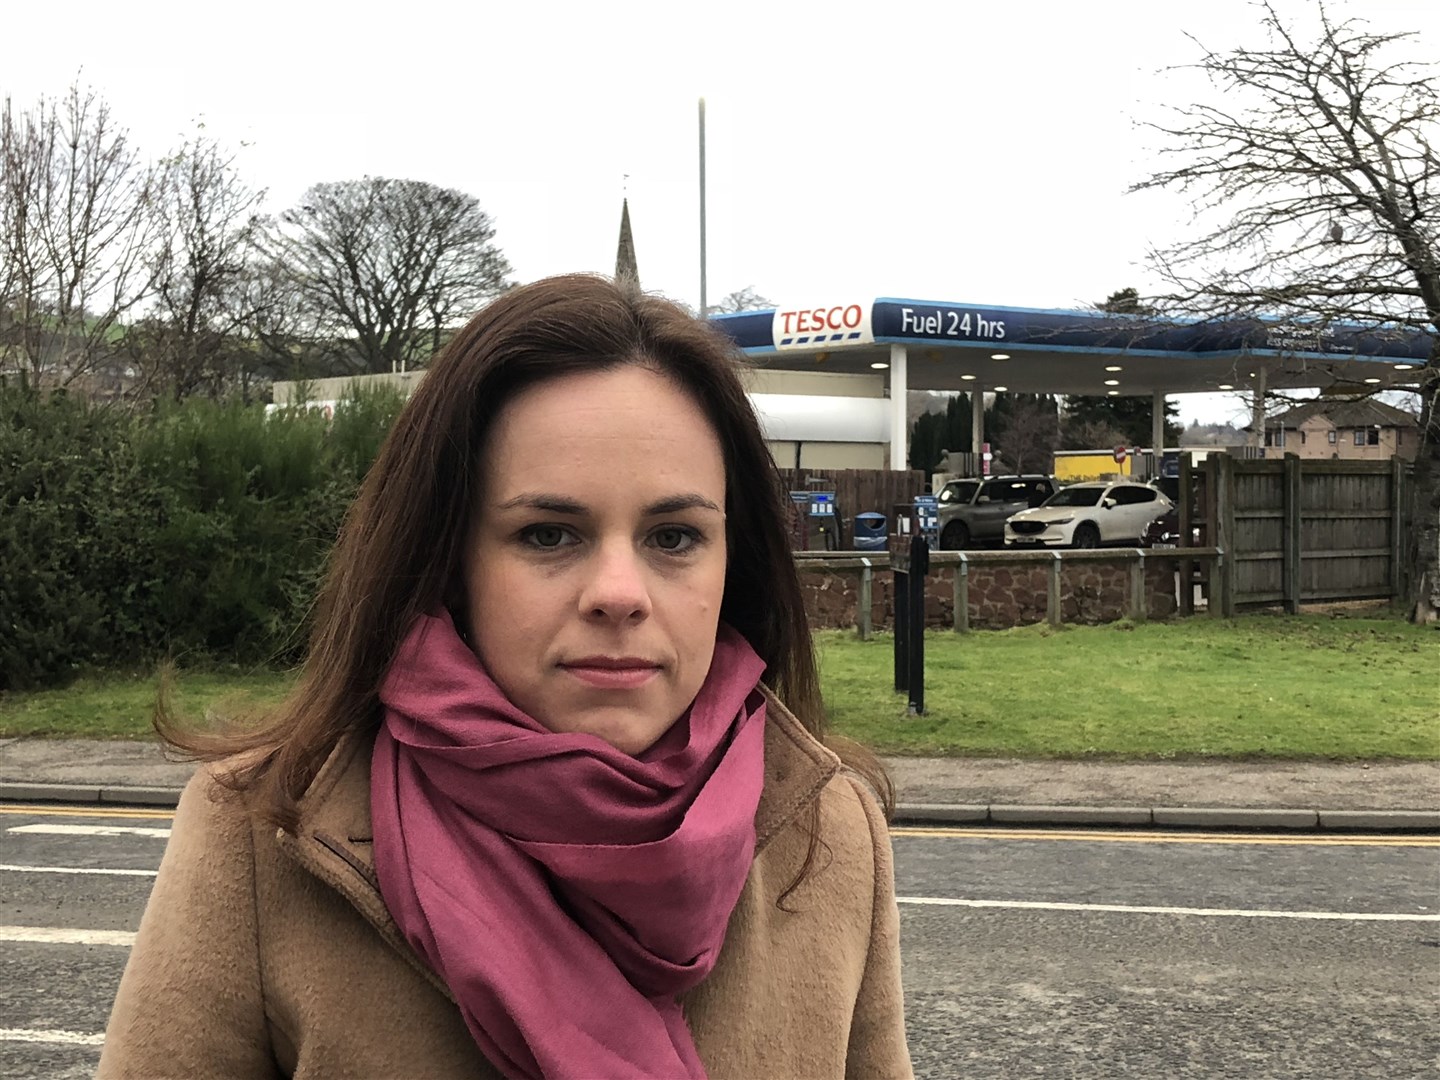 Kate Forbes outside Tesco filling station in Dingwall that advertises 24 hours fuel.